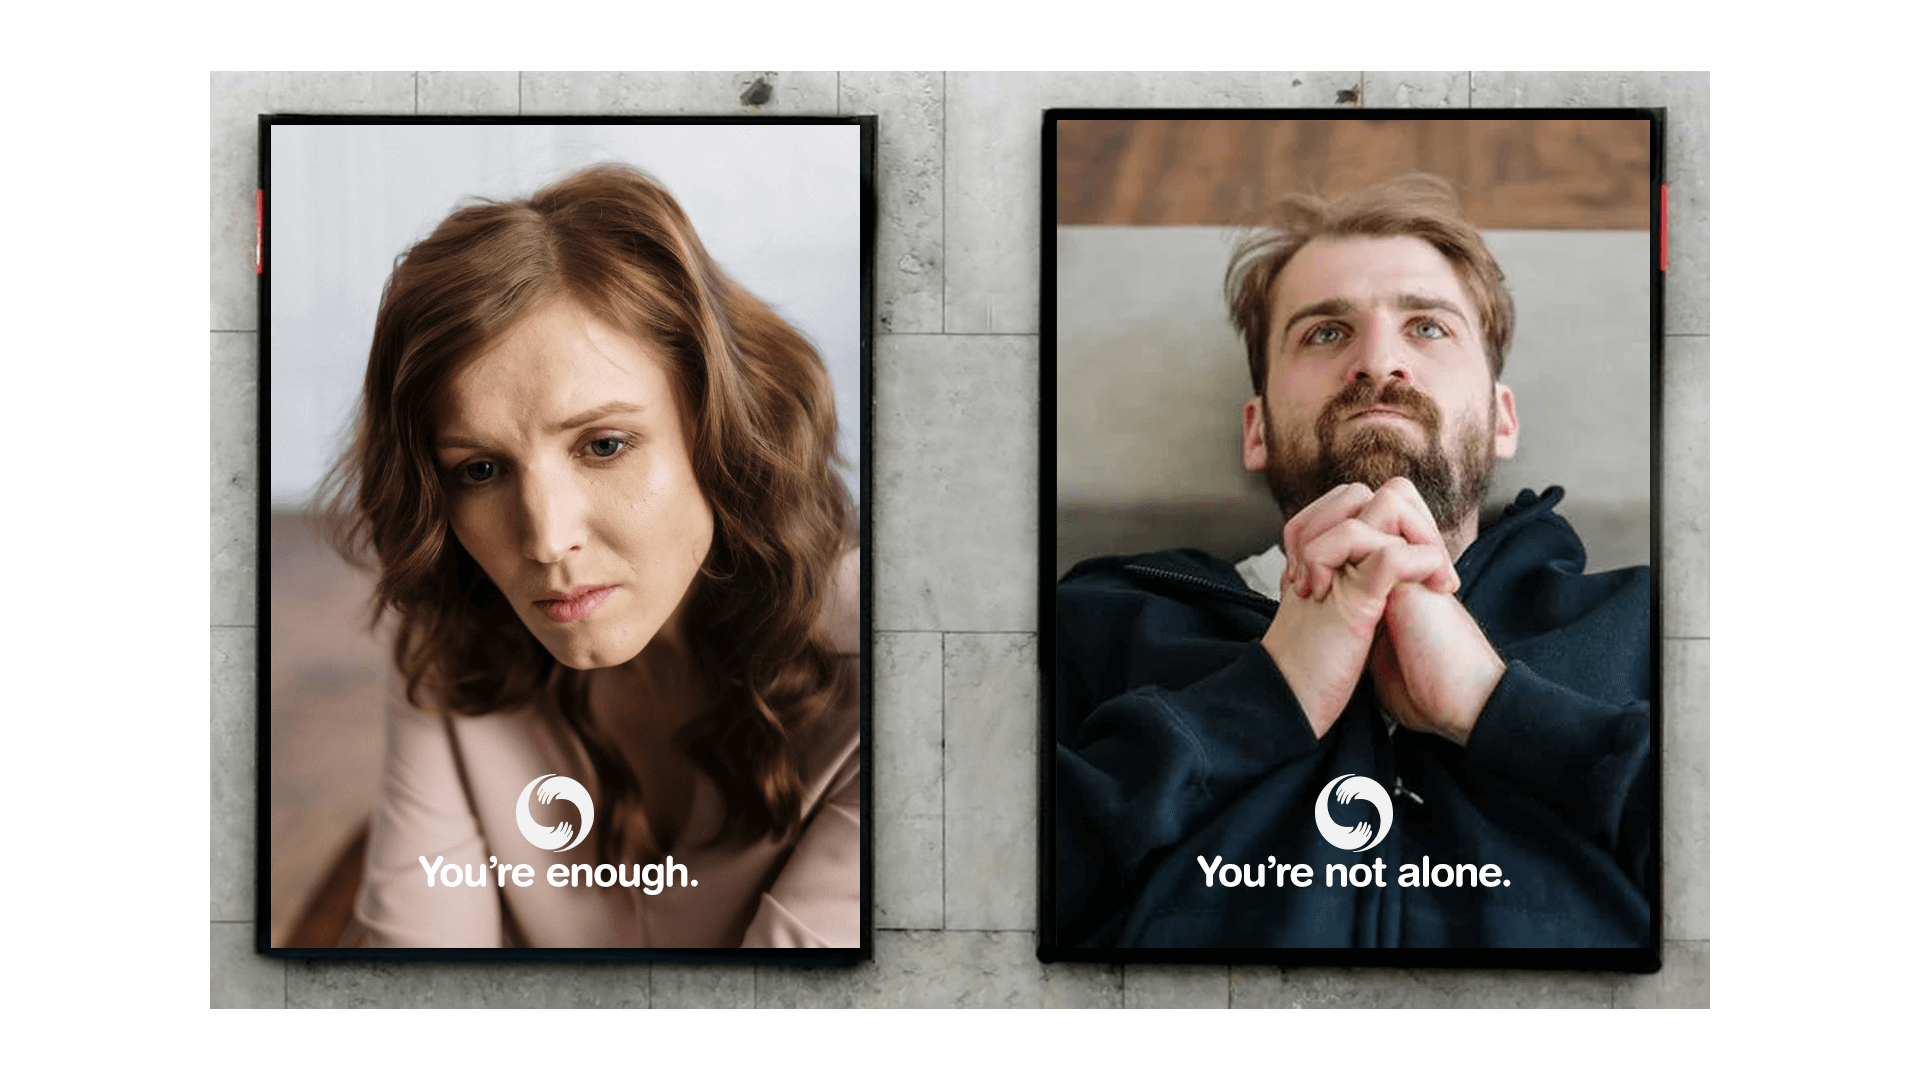 The Mystic Psychologist - You're enough | You're not alone billboard